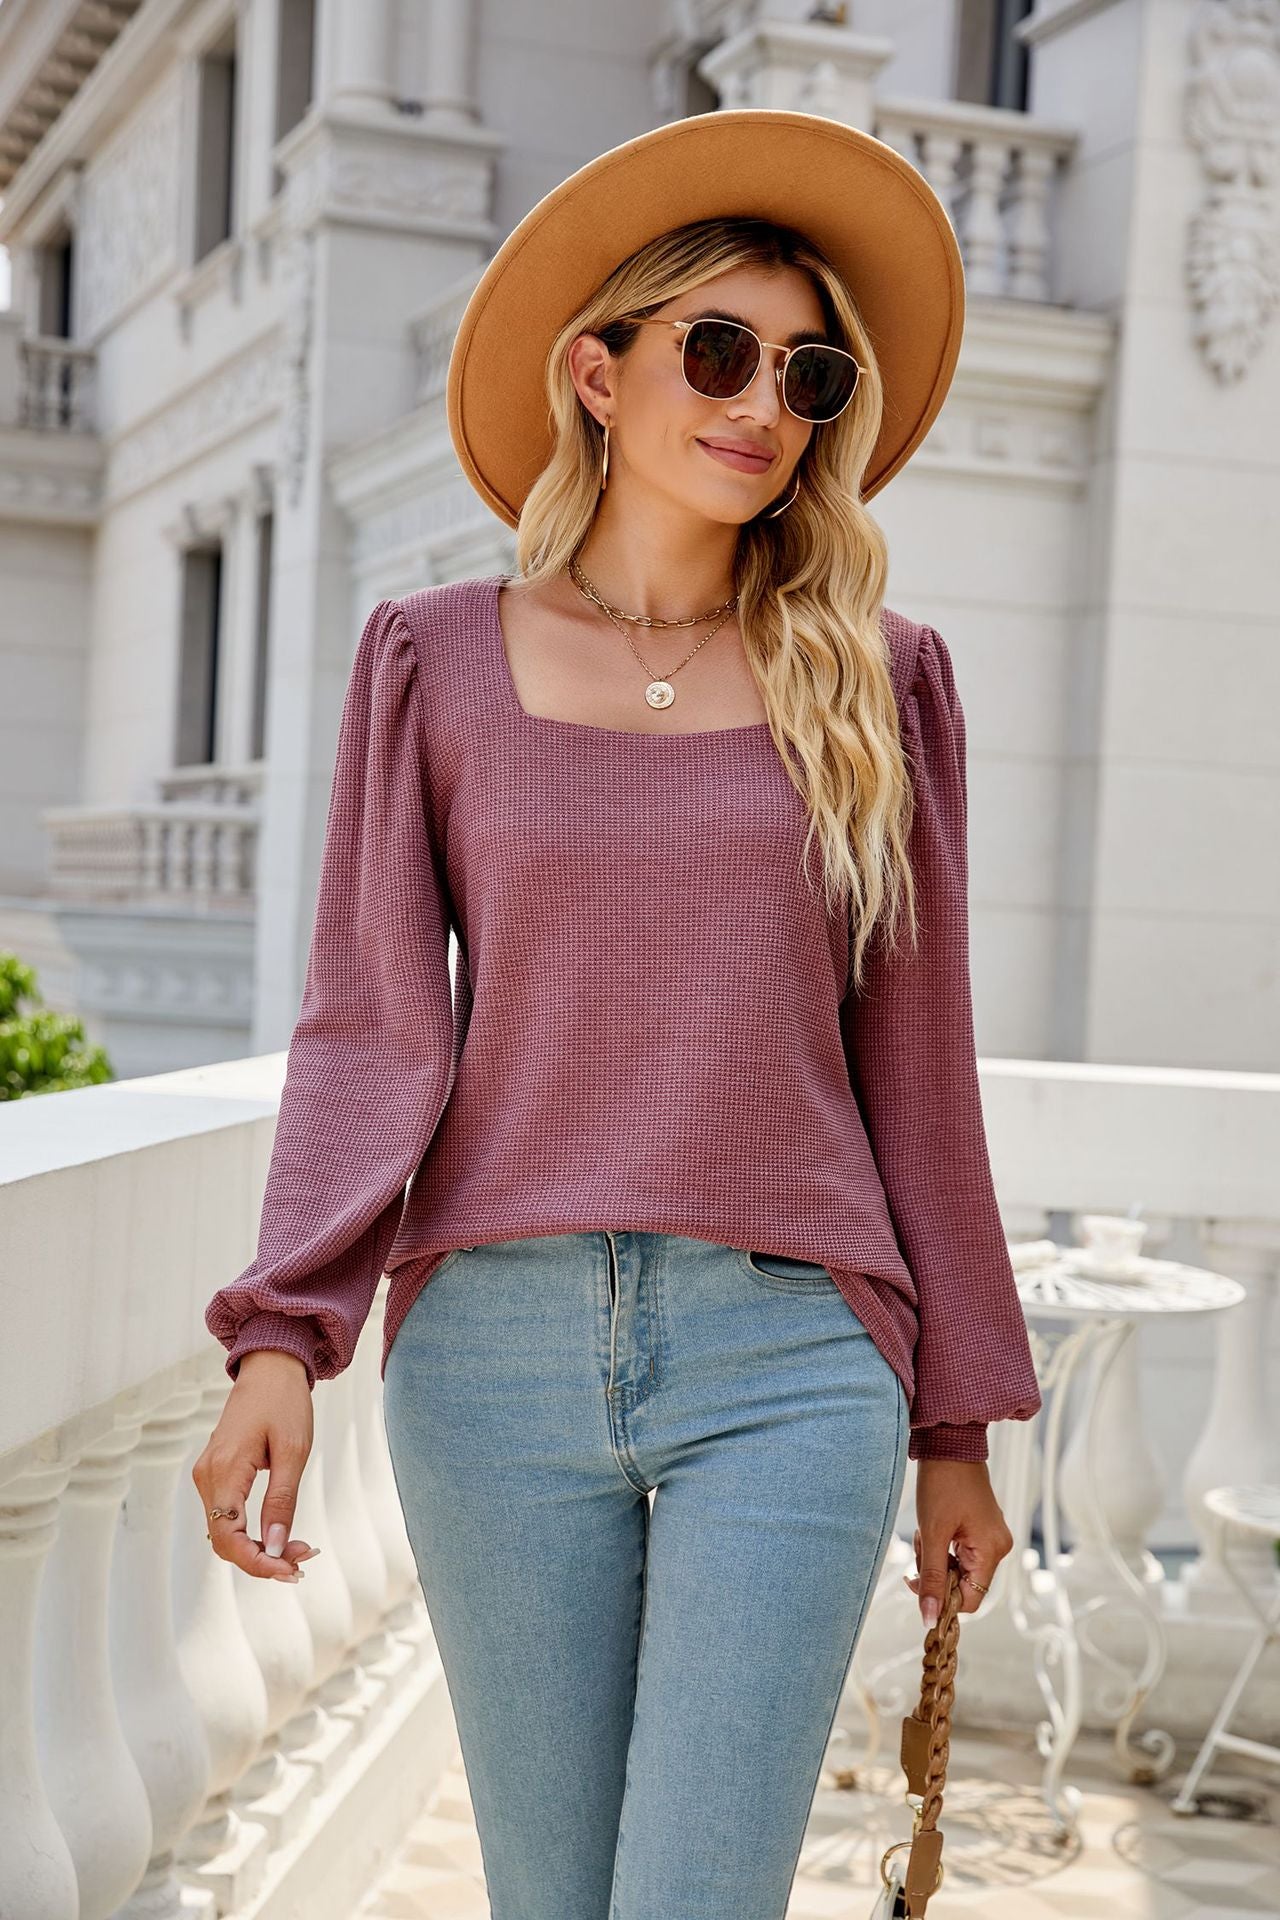 Waffle-Knit Puff Sleeve Square Neck Top